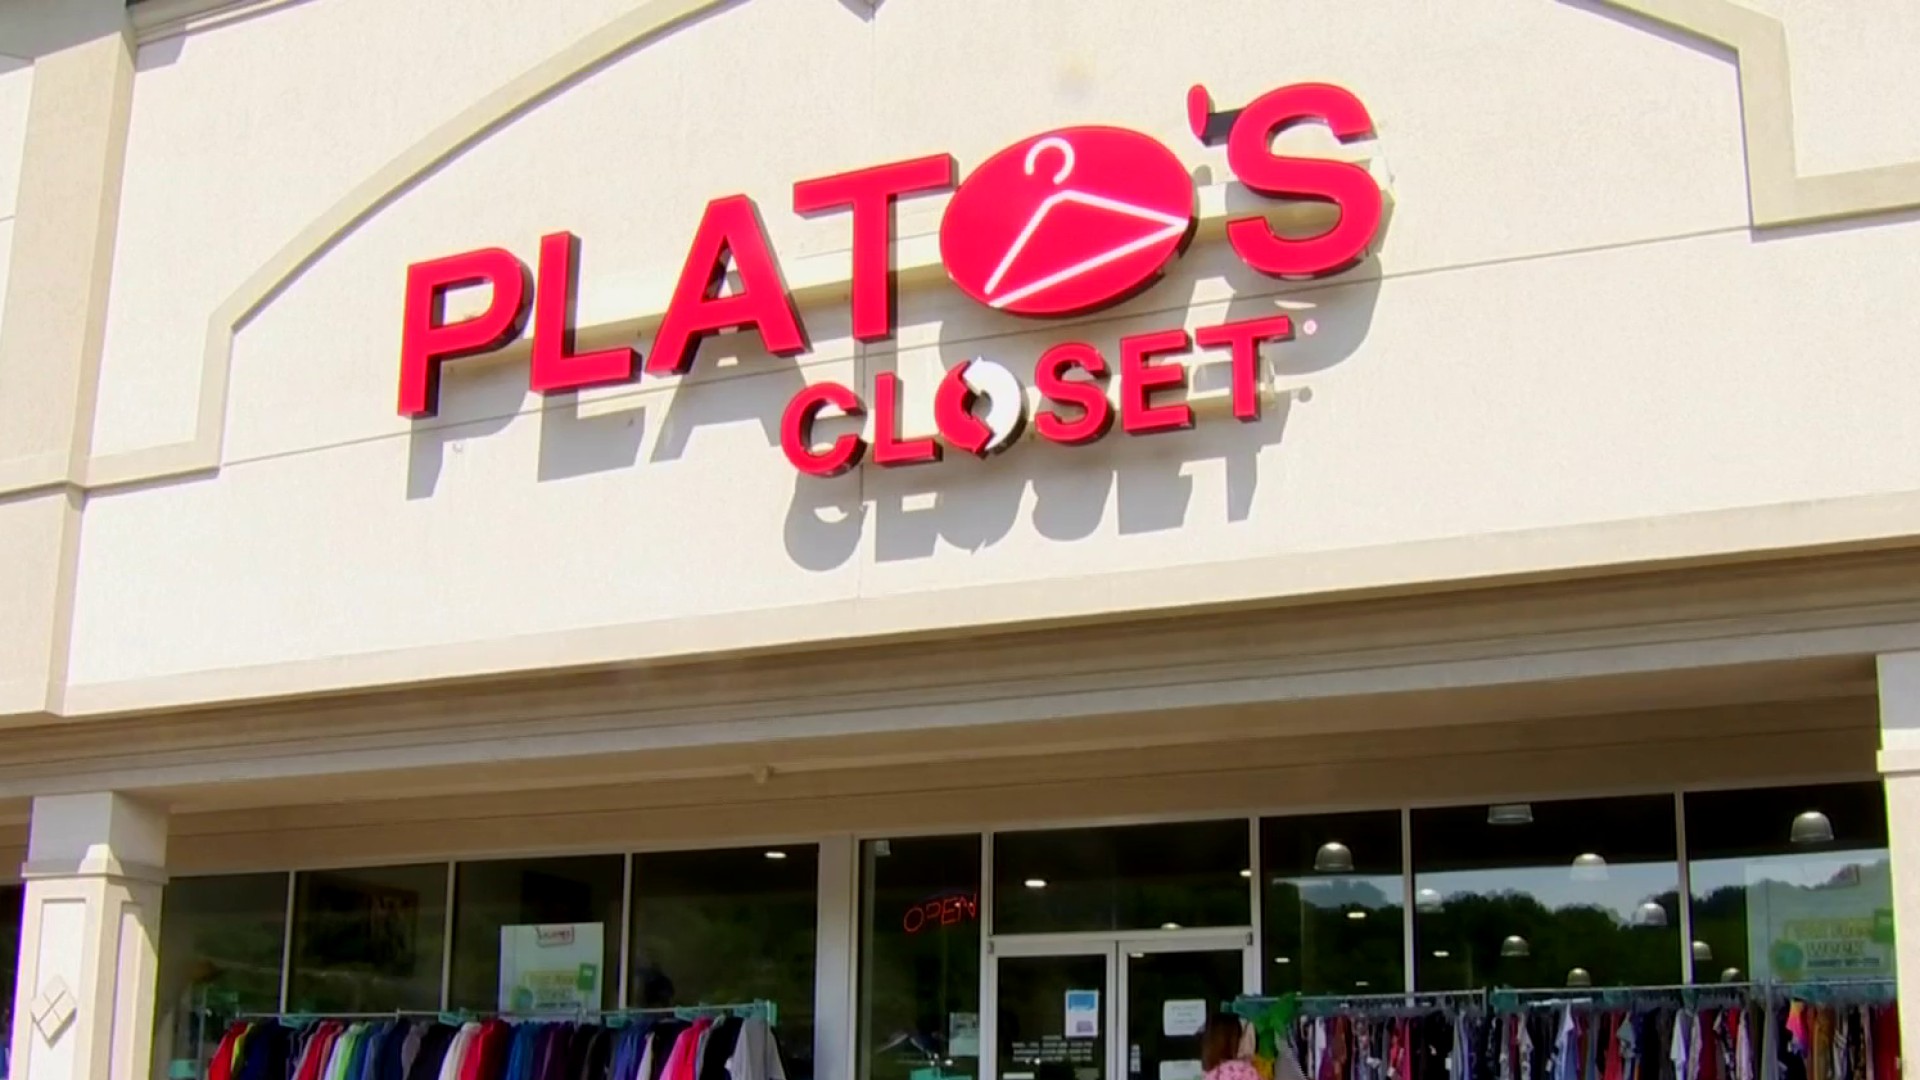 16 Substantial Fees Every Plato's Closet Franchisee Needs to Know